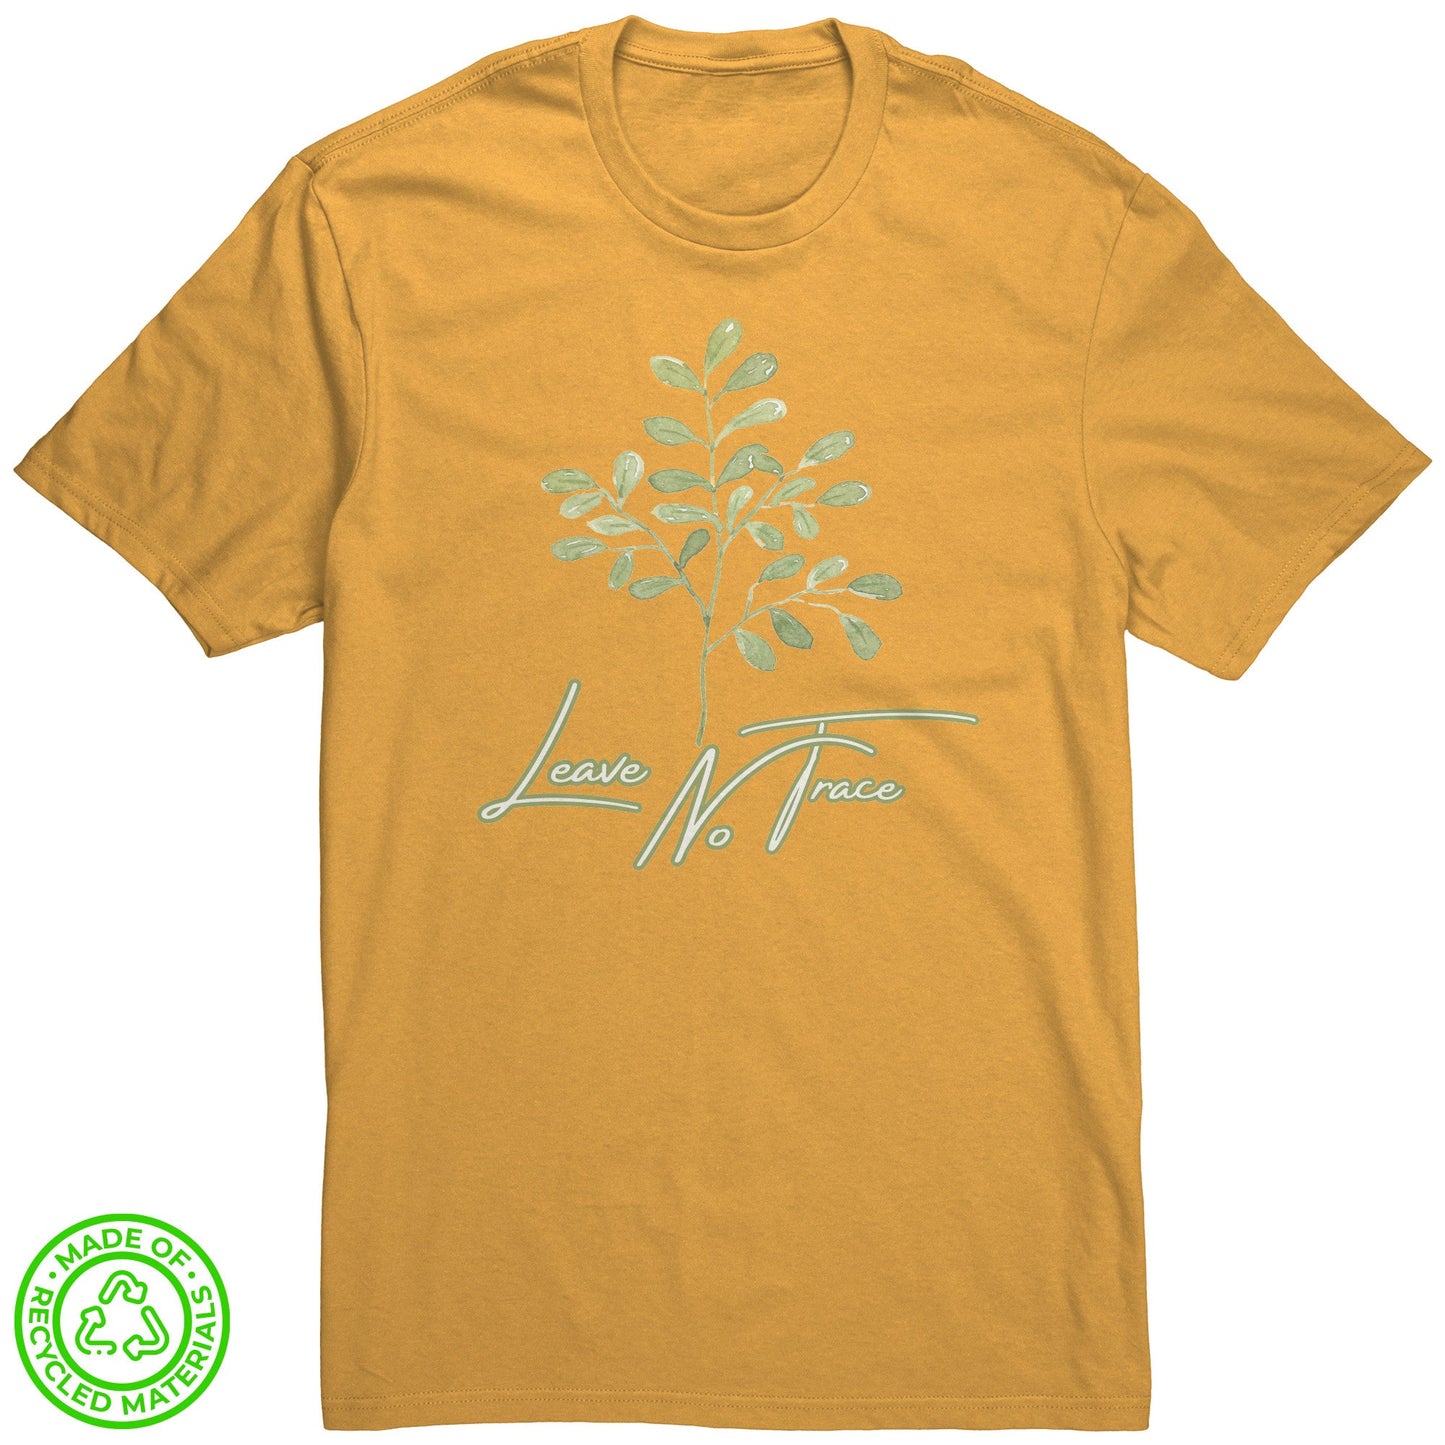 Eco-Friendly Re-Tee (Leave No Trace)